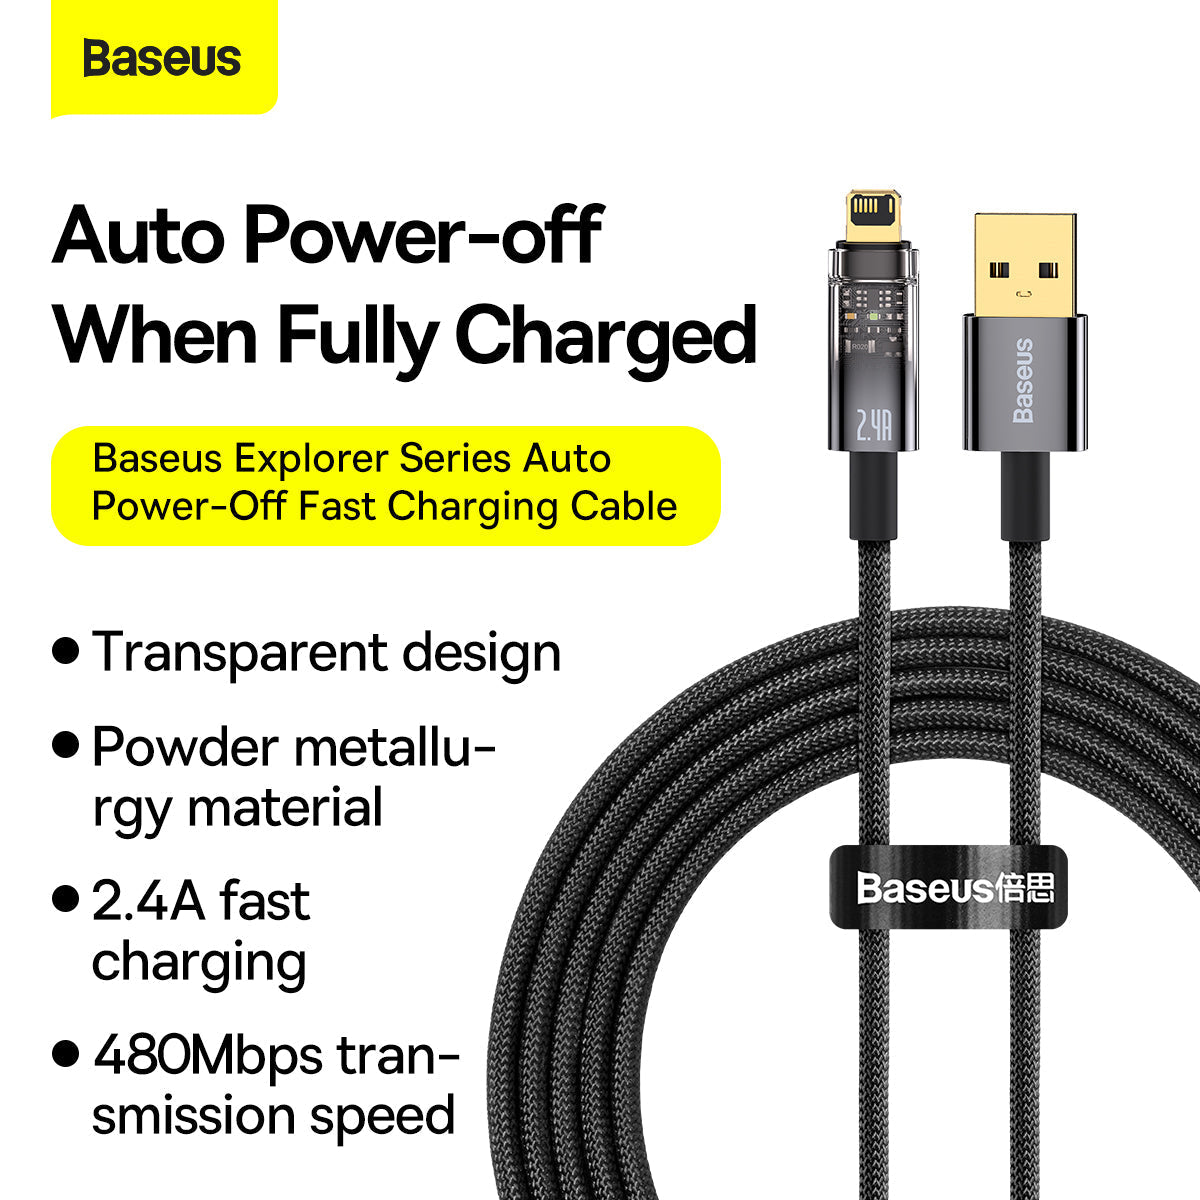 BASEUS EXPLORER SERIES AUTO POWER-OFF FAST CHARGING DATA CABLE USB TO IPH (2.4A)(2M) - Blue